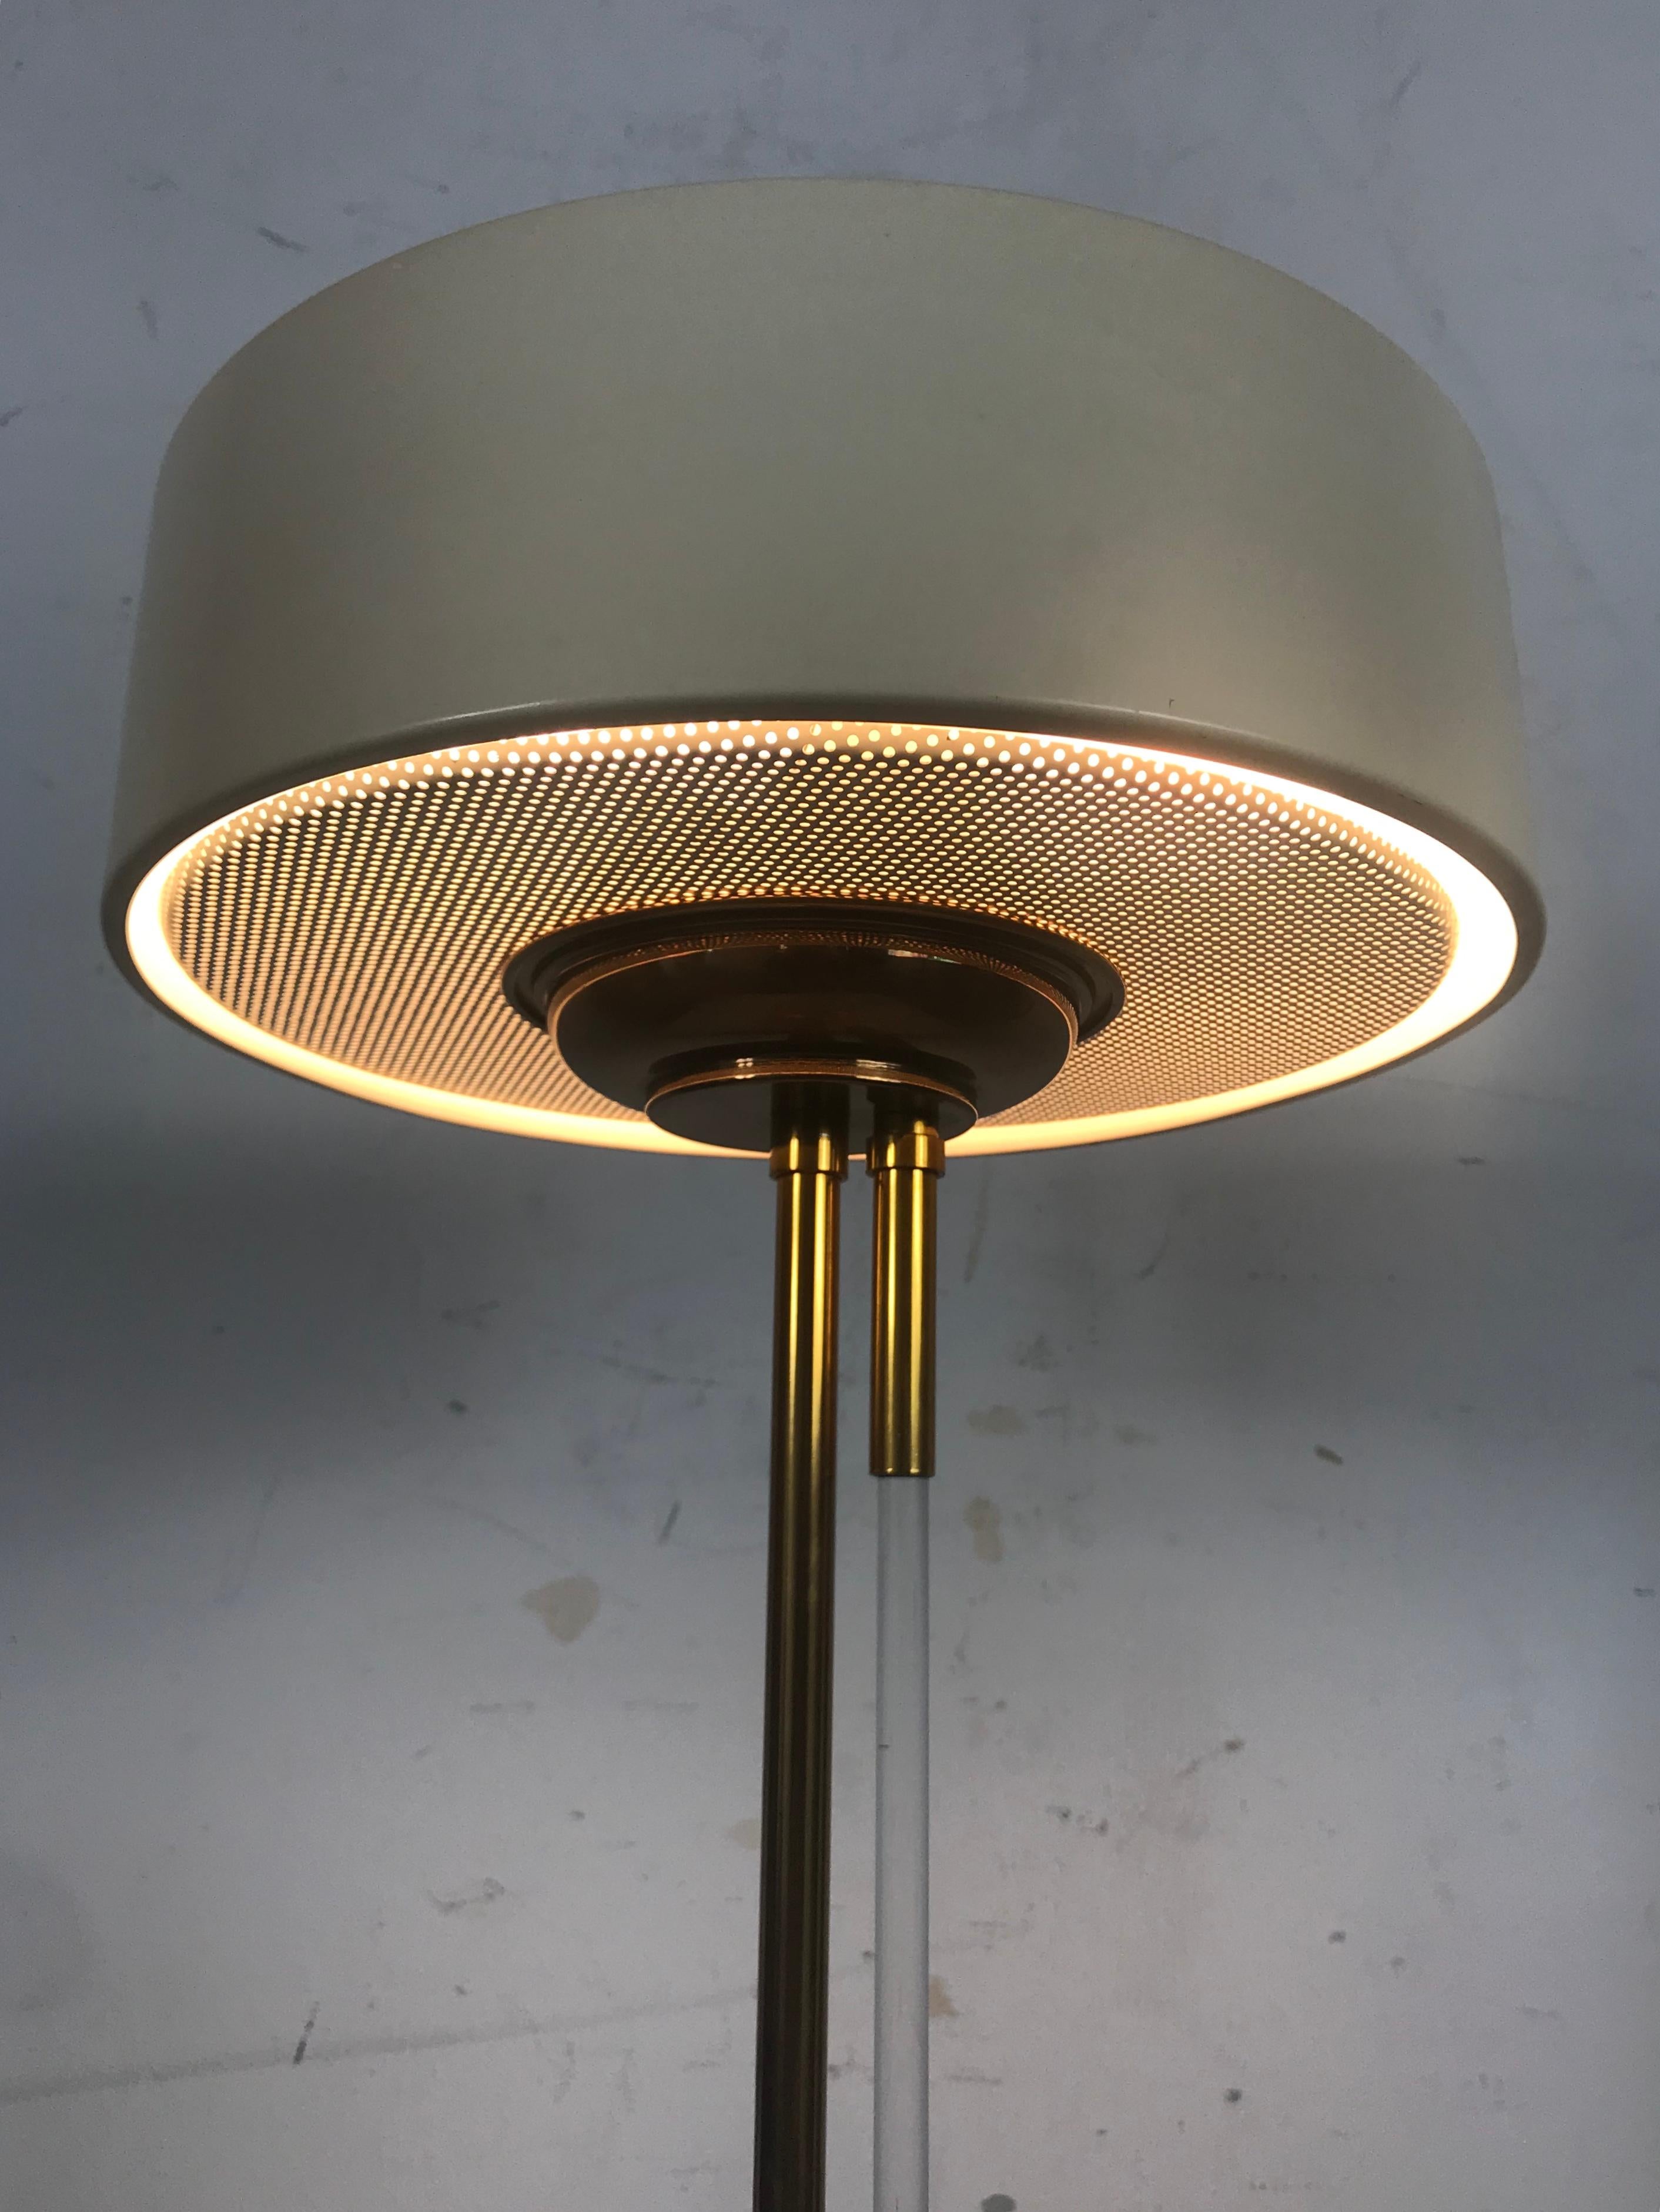 Stunning modernist brass, painted metal and Lucite lamp by Mutual Sunset Lamp co, desk or table lamp, Classic Mid-Century Modern design, original Lucite bar on off switch. Three-way light source option. Retains original metal mesh diffusers as well